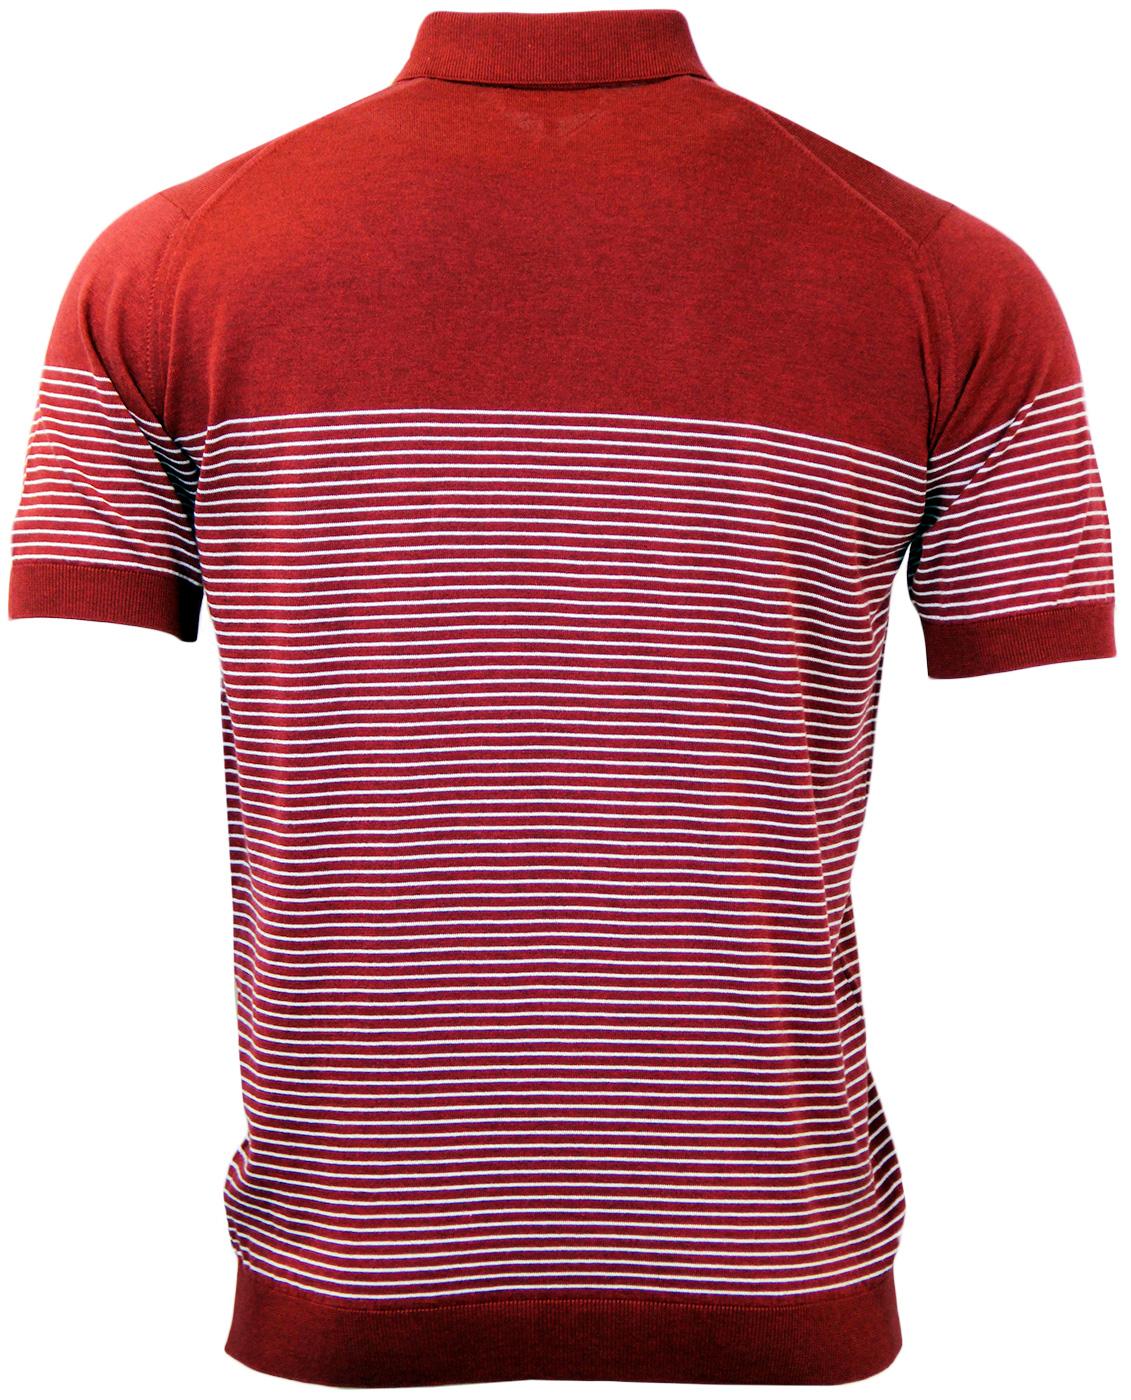 JOHN SMEDLEY Viking Retro Mod Stripe Knitted Polo in Russet Red